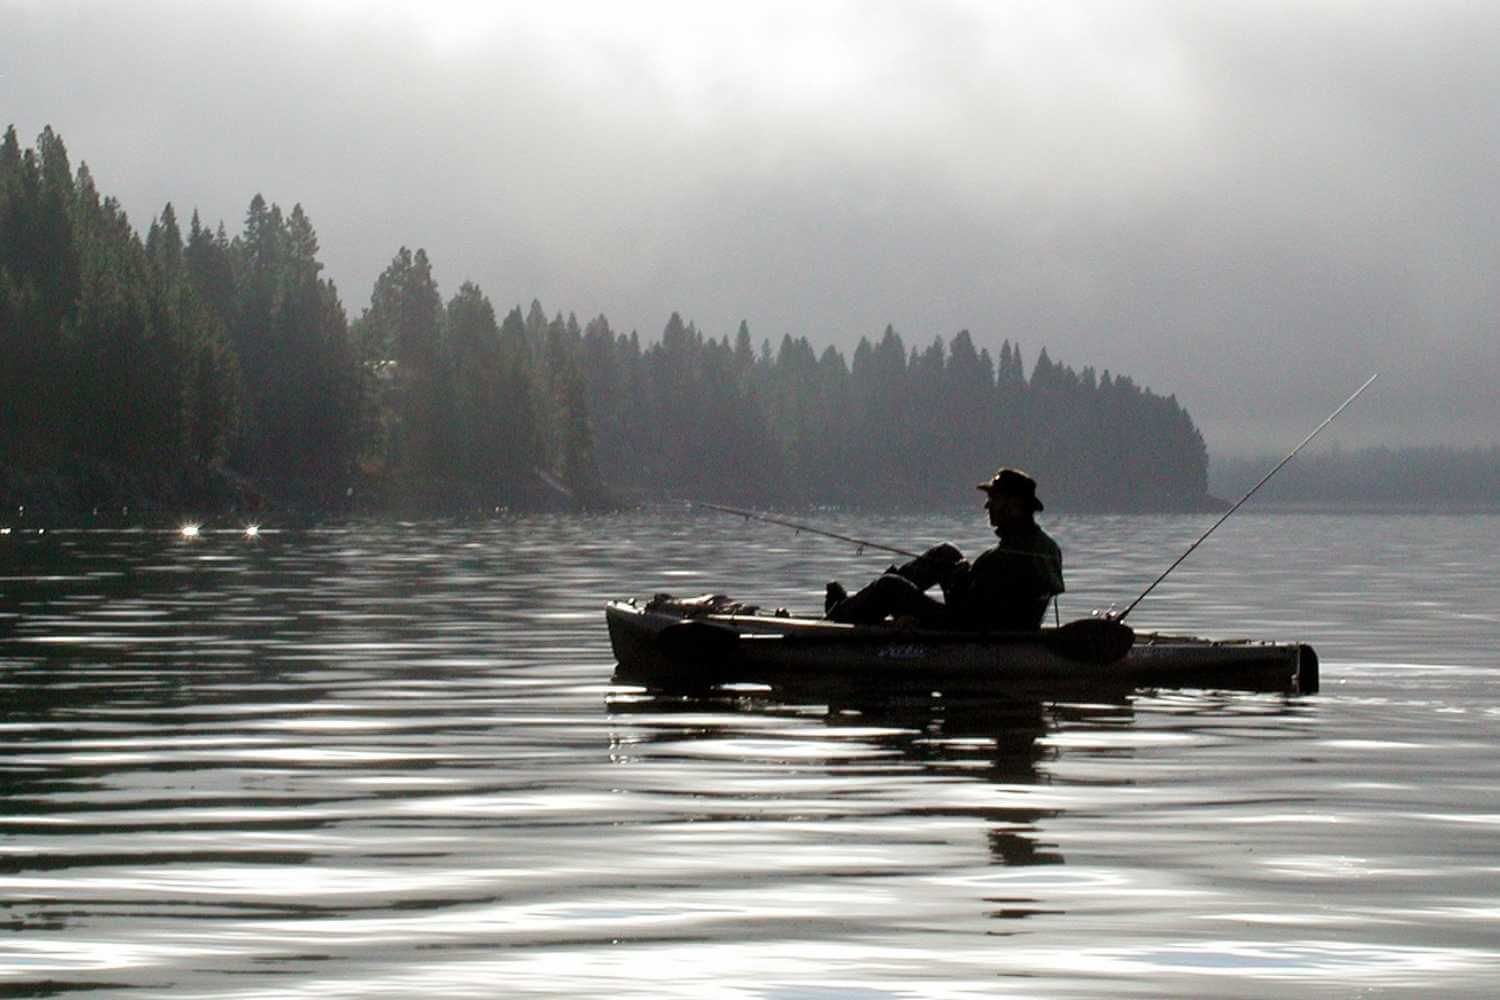 Man fishing early morning from small watercraft on lake almanor